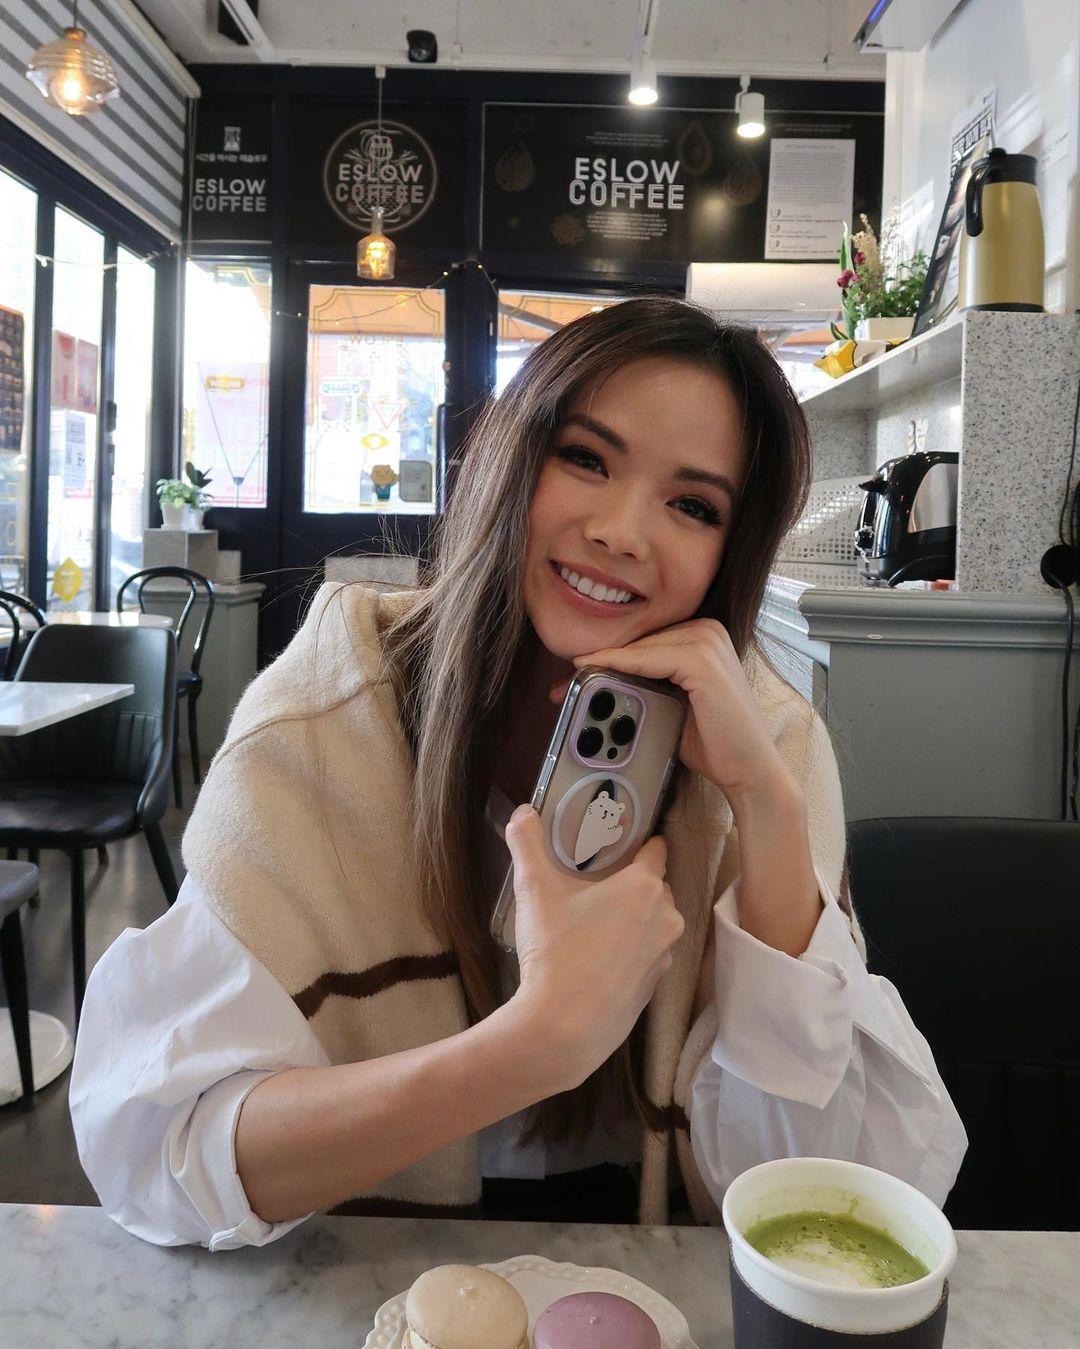 class="content__text"
 Coffee date and the cutest phone case from @rhinoshield 🤍

I've been using RHINOSHIELD phone cases for the past few weeks and absolutely love how protective and customizable they are. If you're still doing last minute shopping this Christmas for yourself or your loved ones, you can use my code ANNIEP15 for a 15% discount off your RHINOSHIELD purchase (valid for one week). 

Shop link in my bio 🥰

A D | #MadeForImpact #RHINOSHIELD #giftideas #café #seoul #koreanfashion #cafehopping #coffeeaddict #coffeedate #coffeelover #coffeelife #luxurylifestyle #ａｅｓｔｈｅｔｉｃ #aestheticoutfit #aestheticfashion 
 